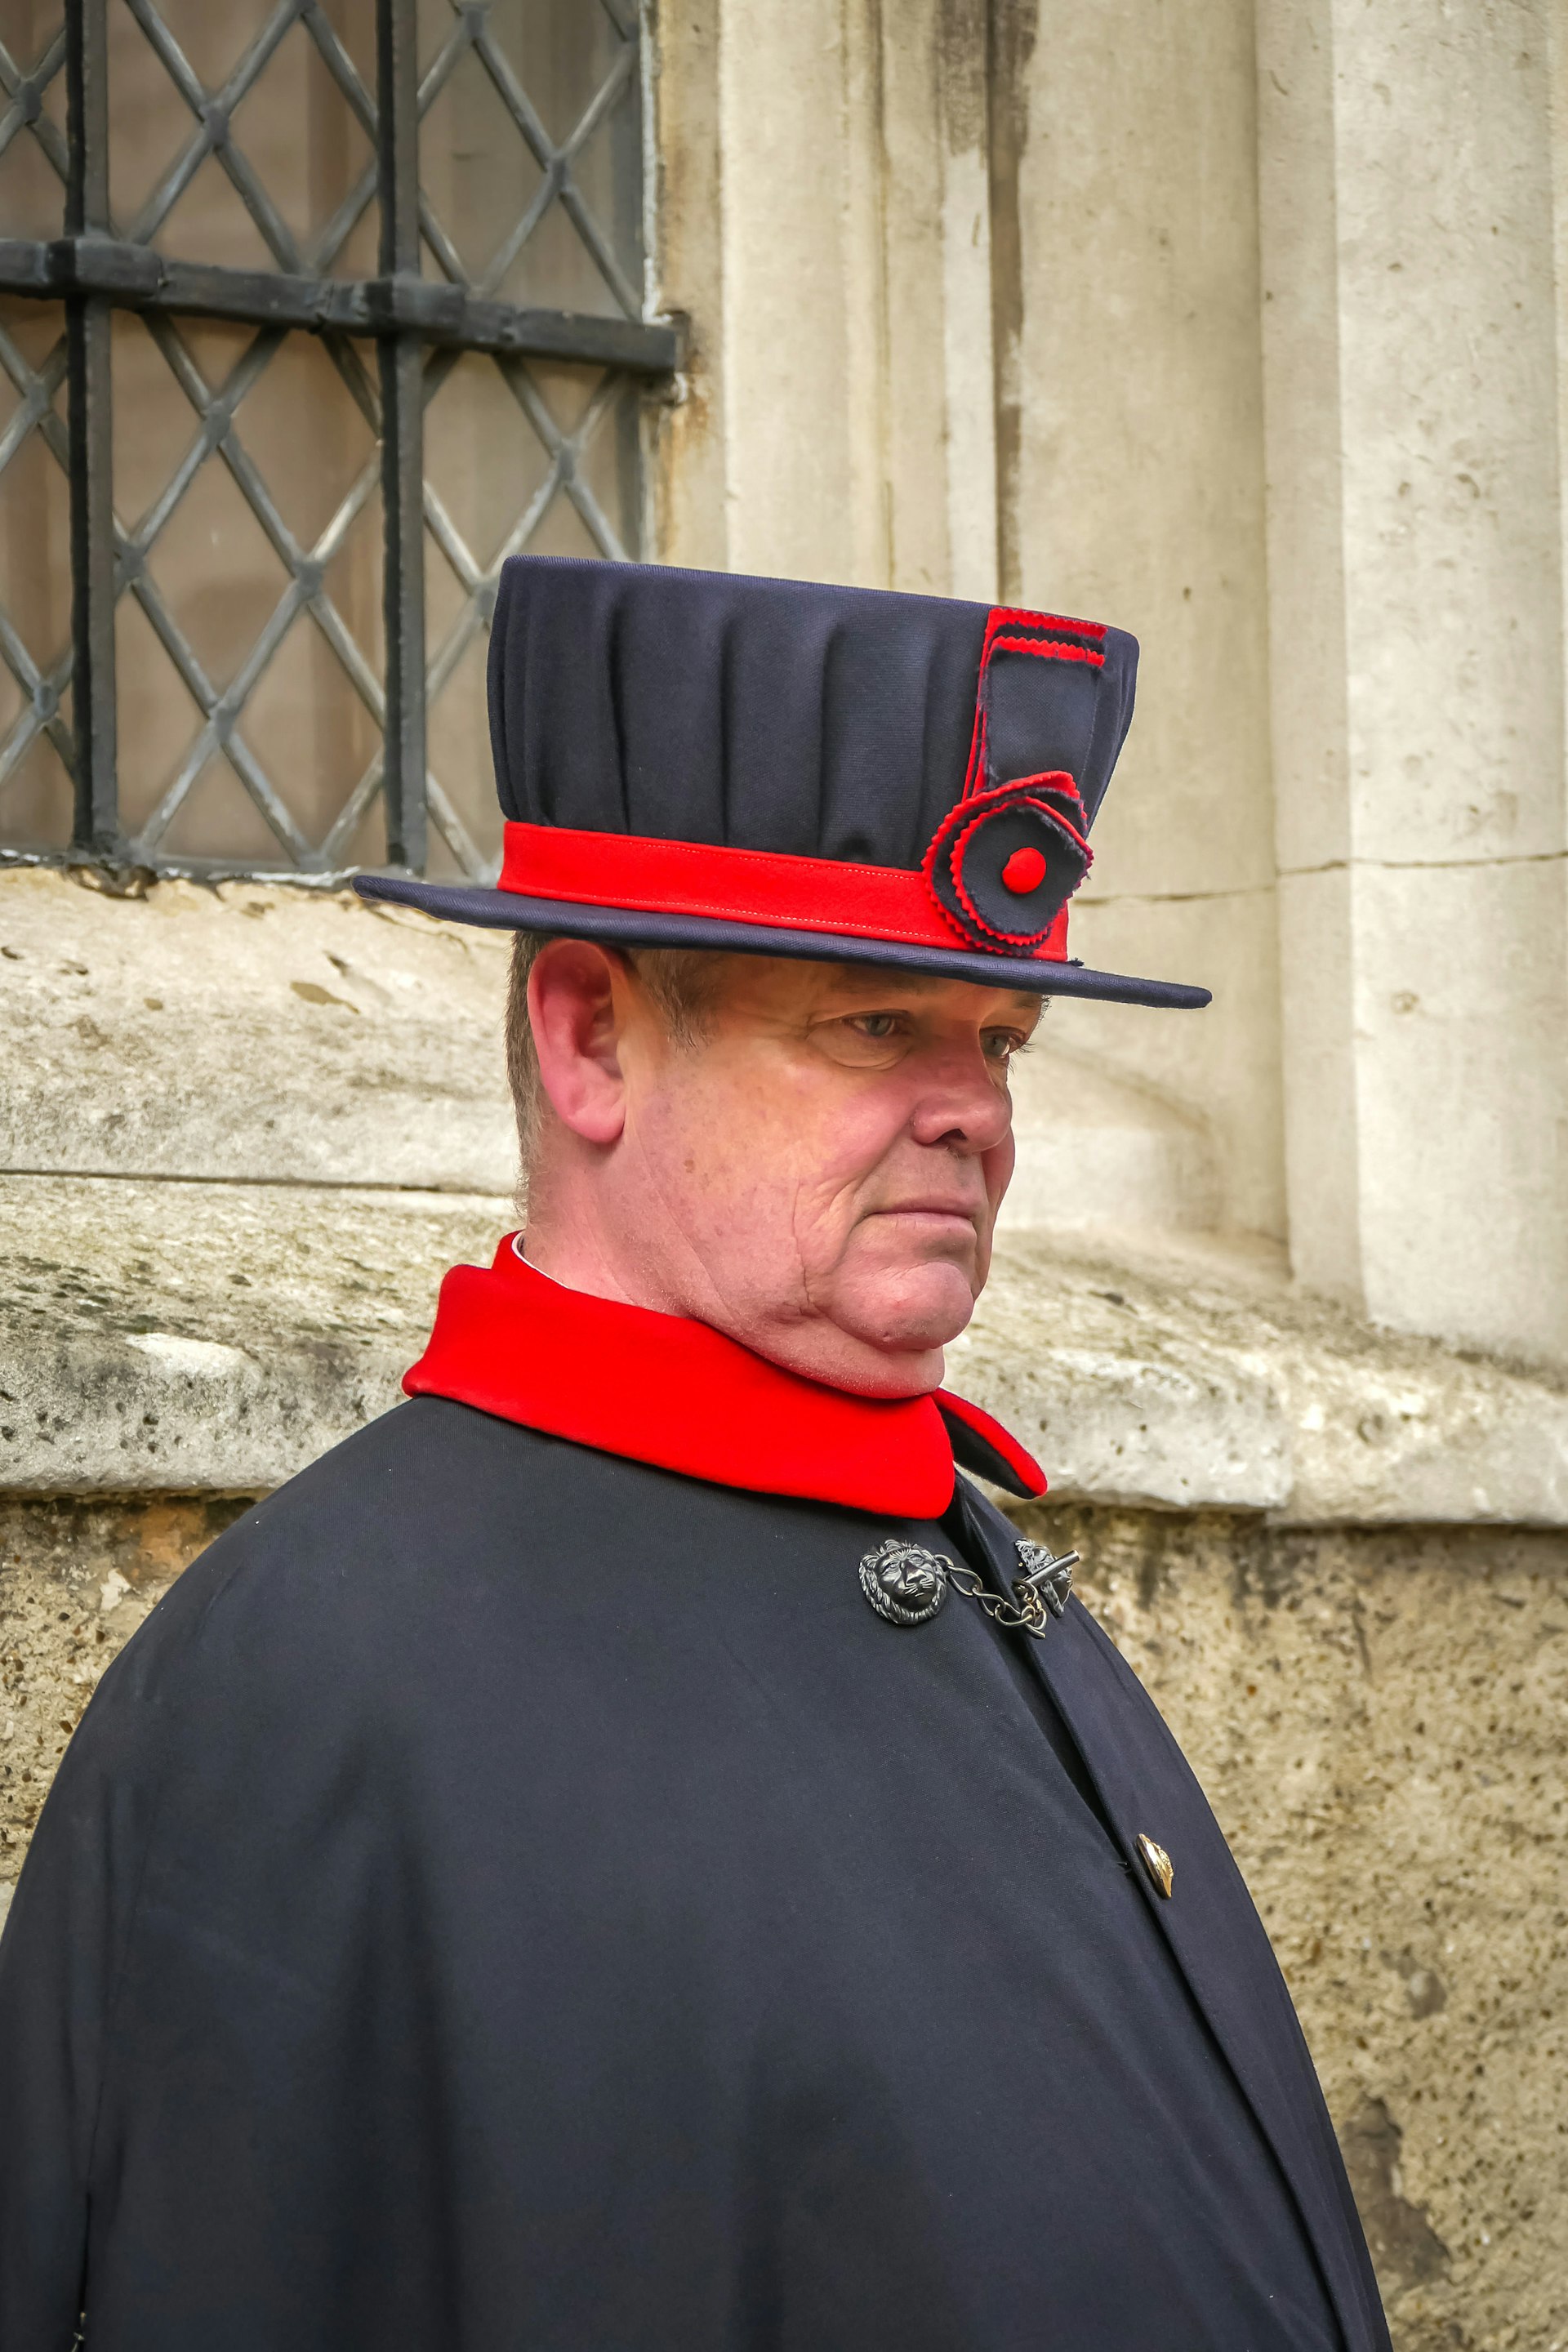 Tower of London's famous Yeoman Warders may be laid off